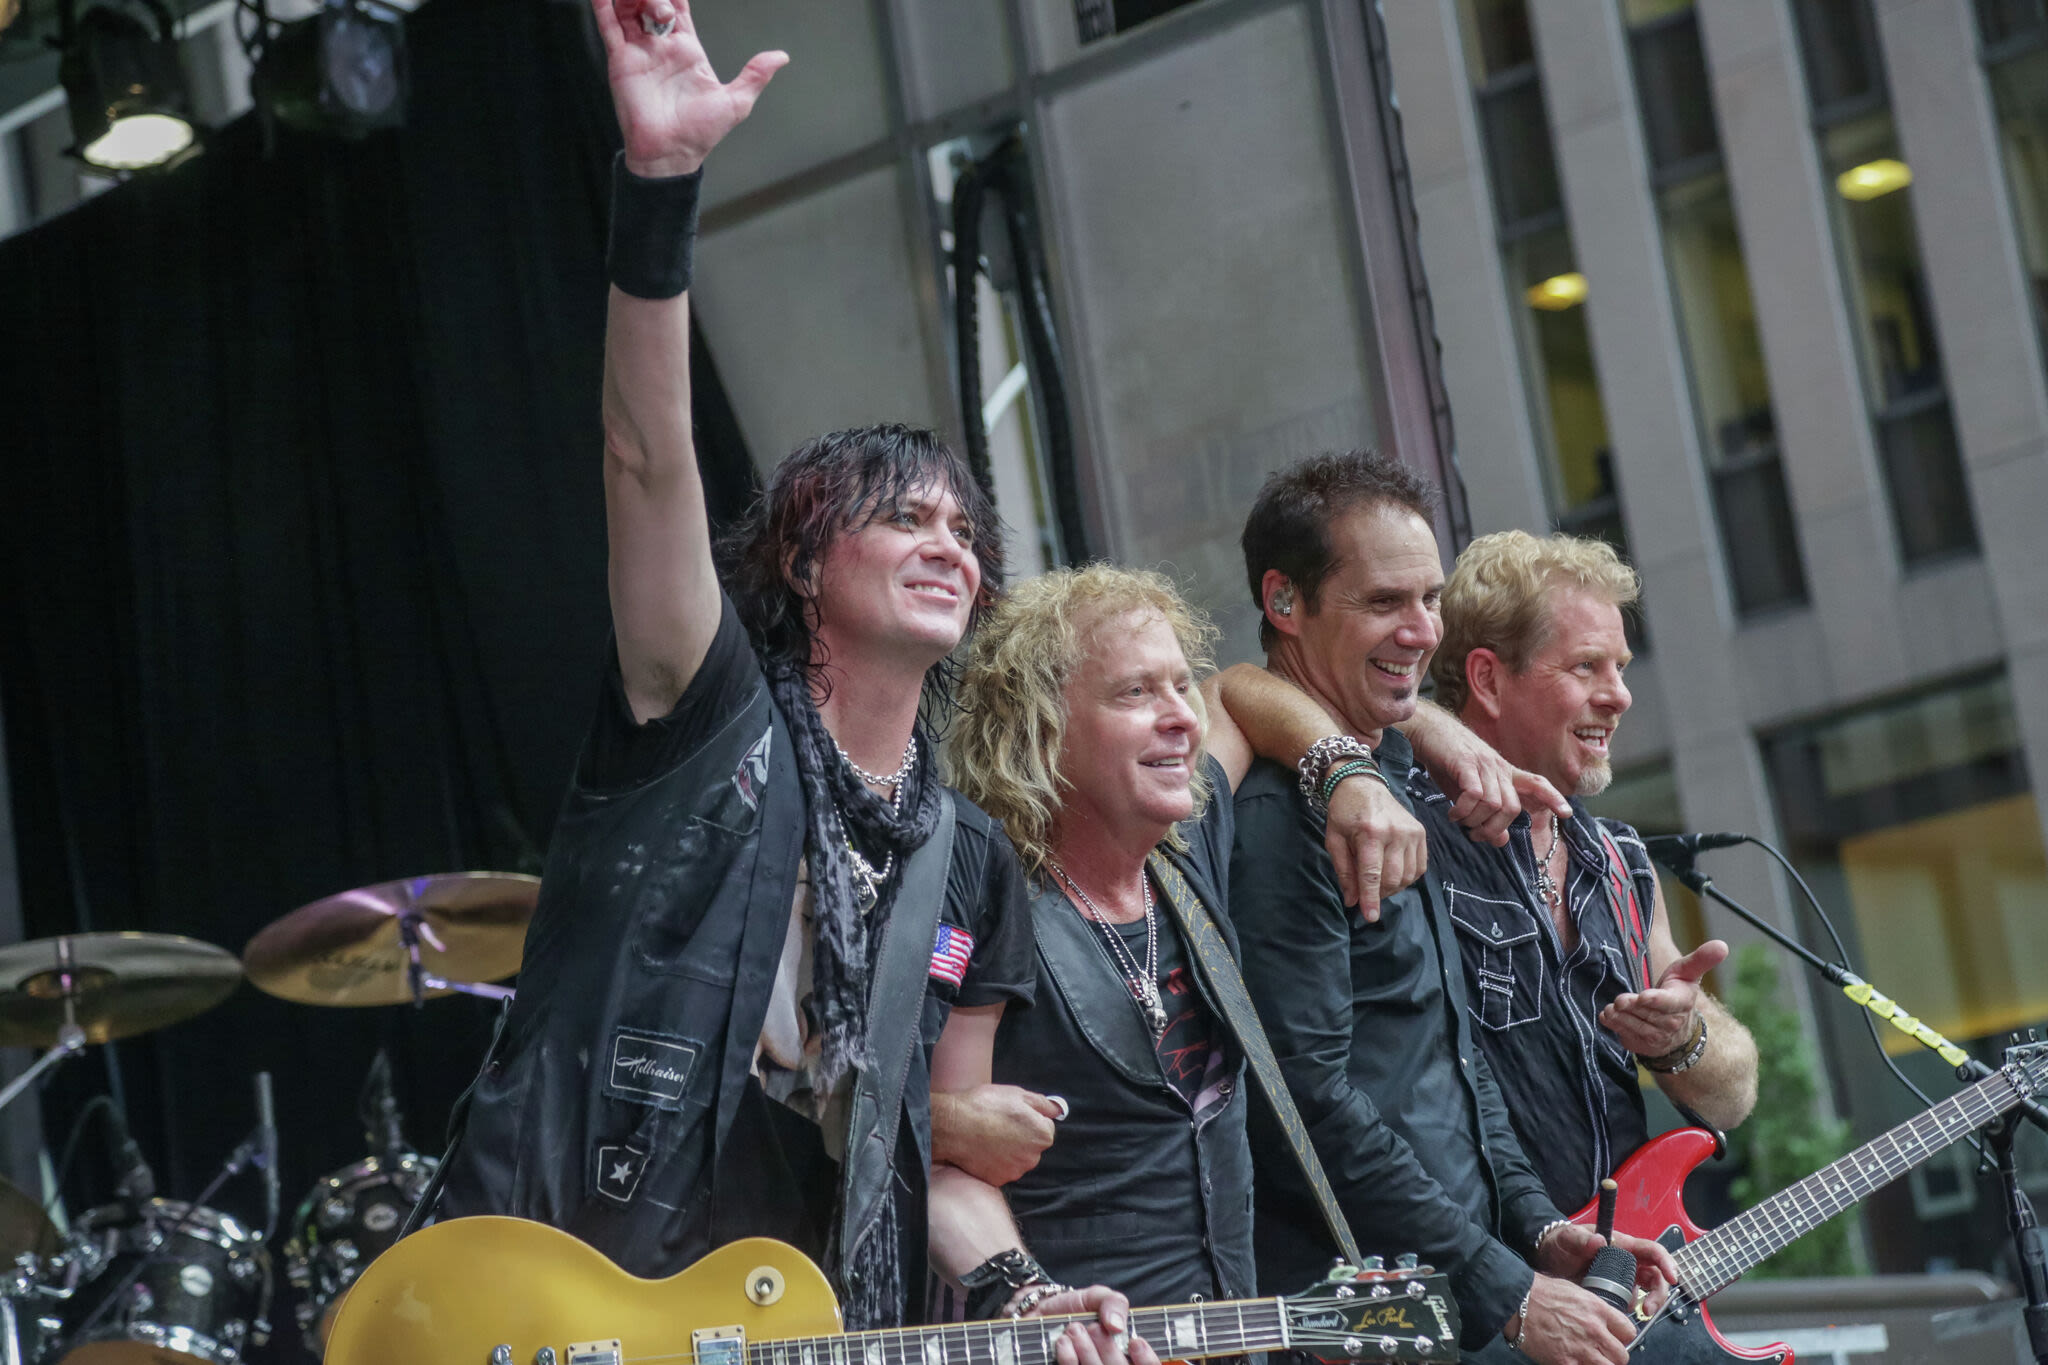 Night Ranger to play Memorial Day concert in Coleman